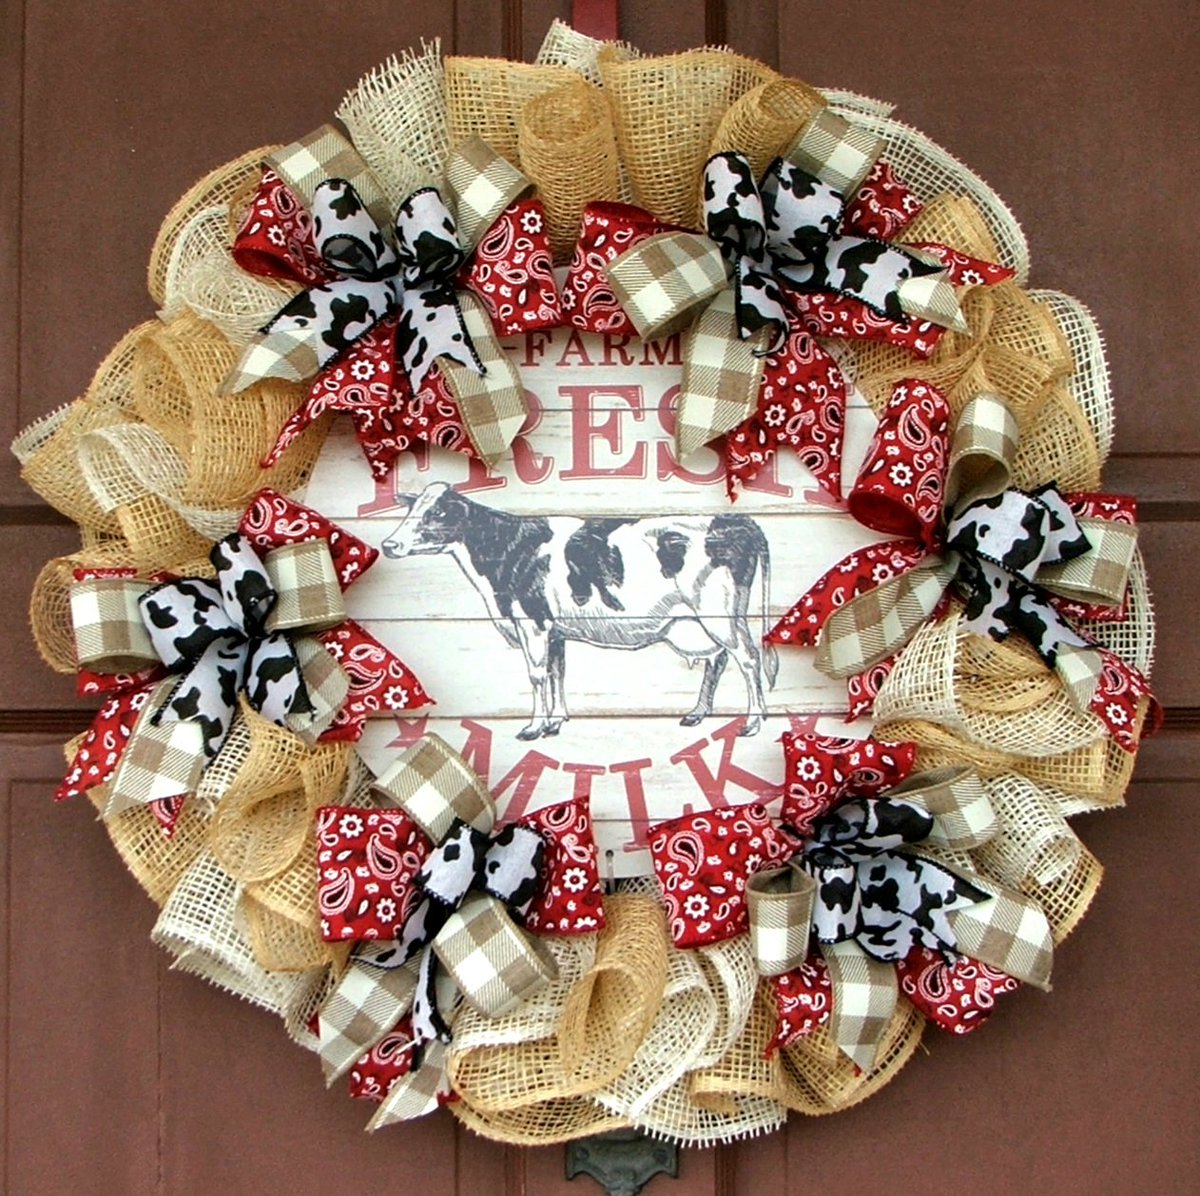 New additions to the shop! There is only ONE of each of these farmhouse wreaths.  Details at: deebeegallery.com 

Remember to love and retweet! Thanks 

#wreathsforsale #wreathmaker #deebeegallery #farmhousewreath #everydaywreath